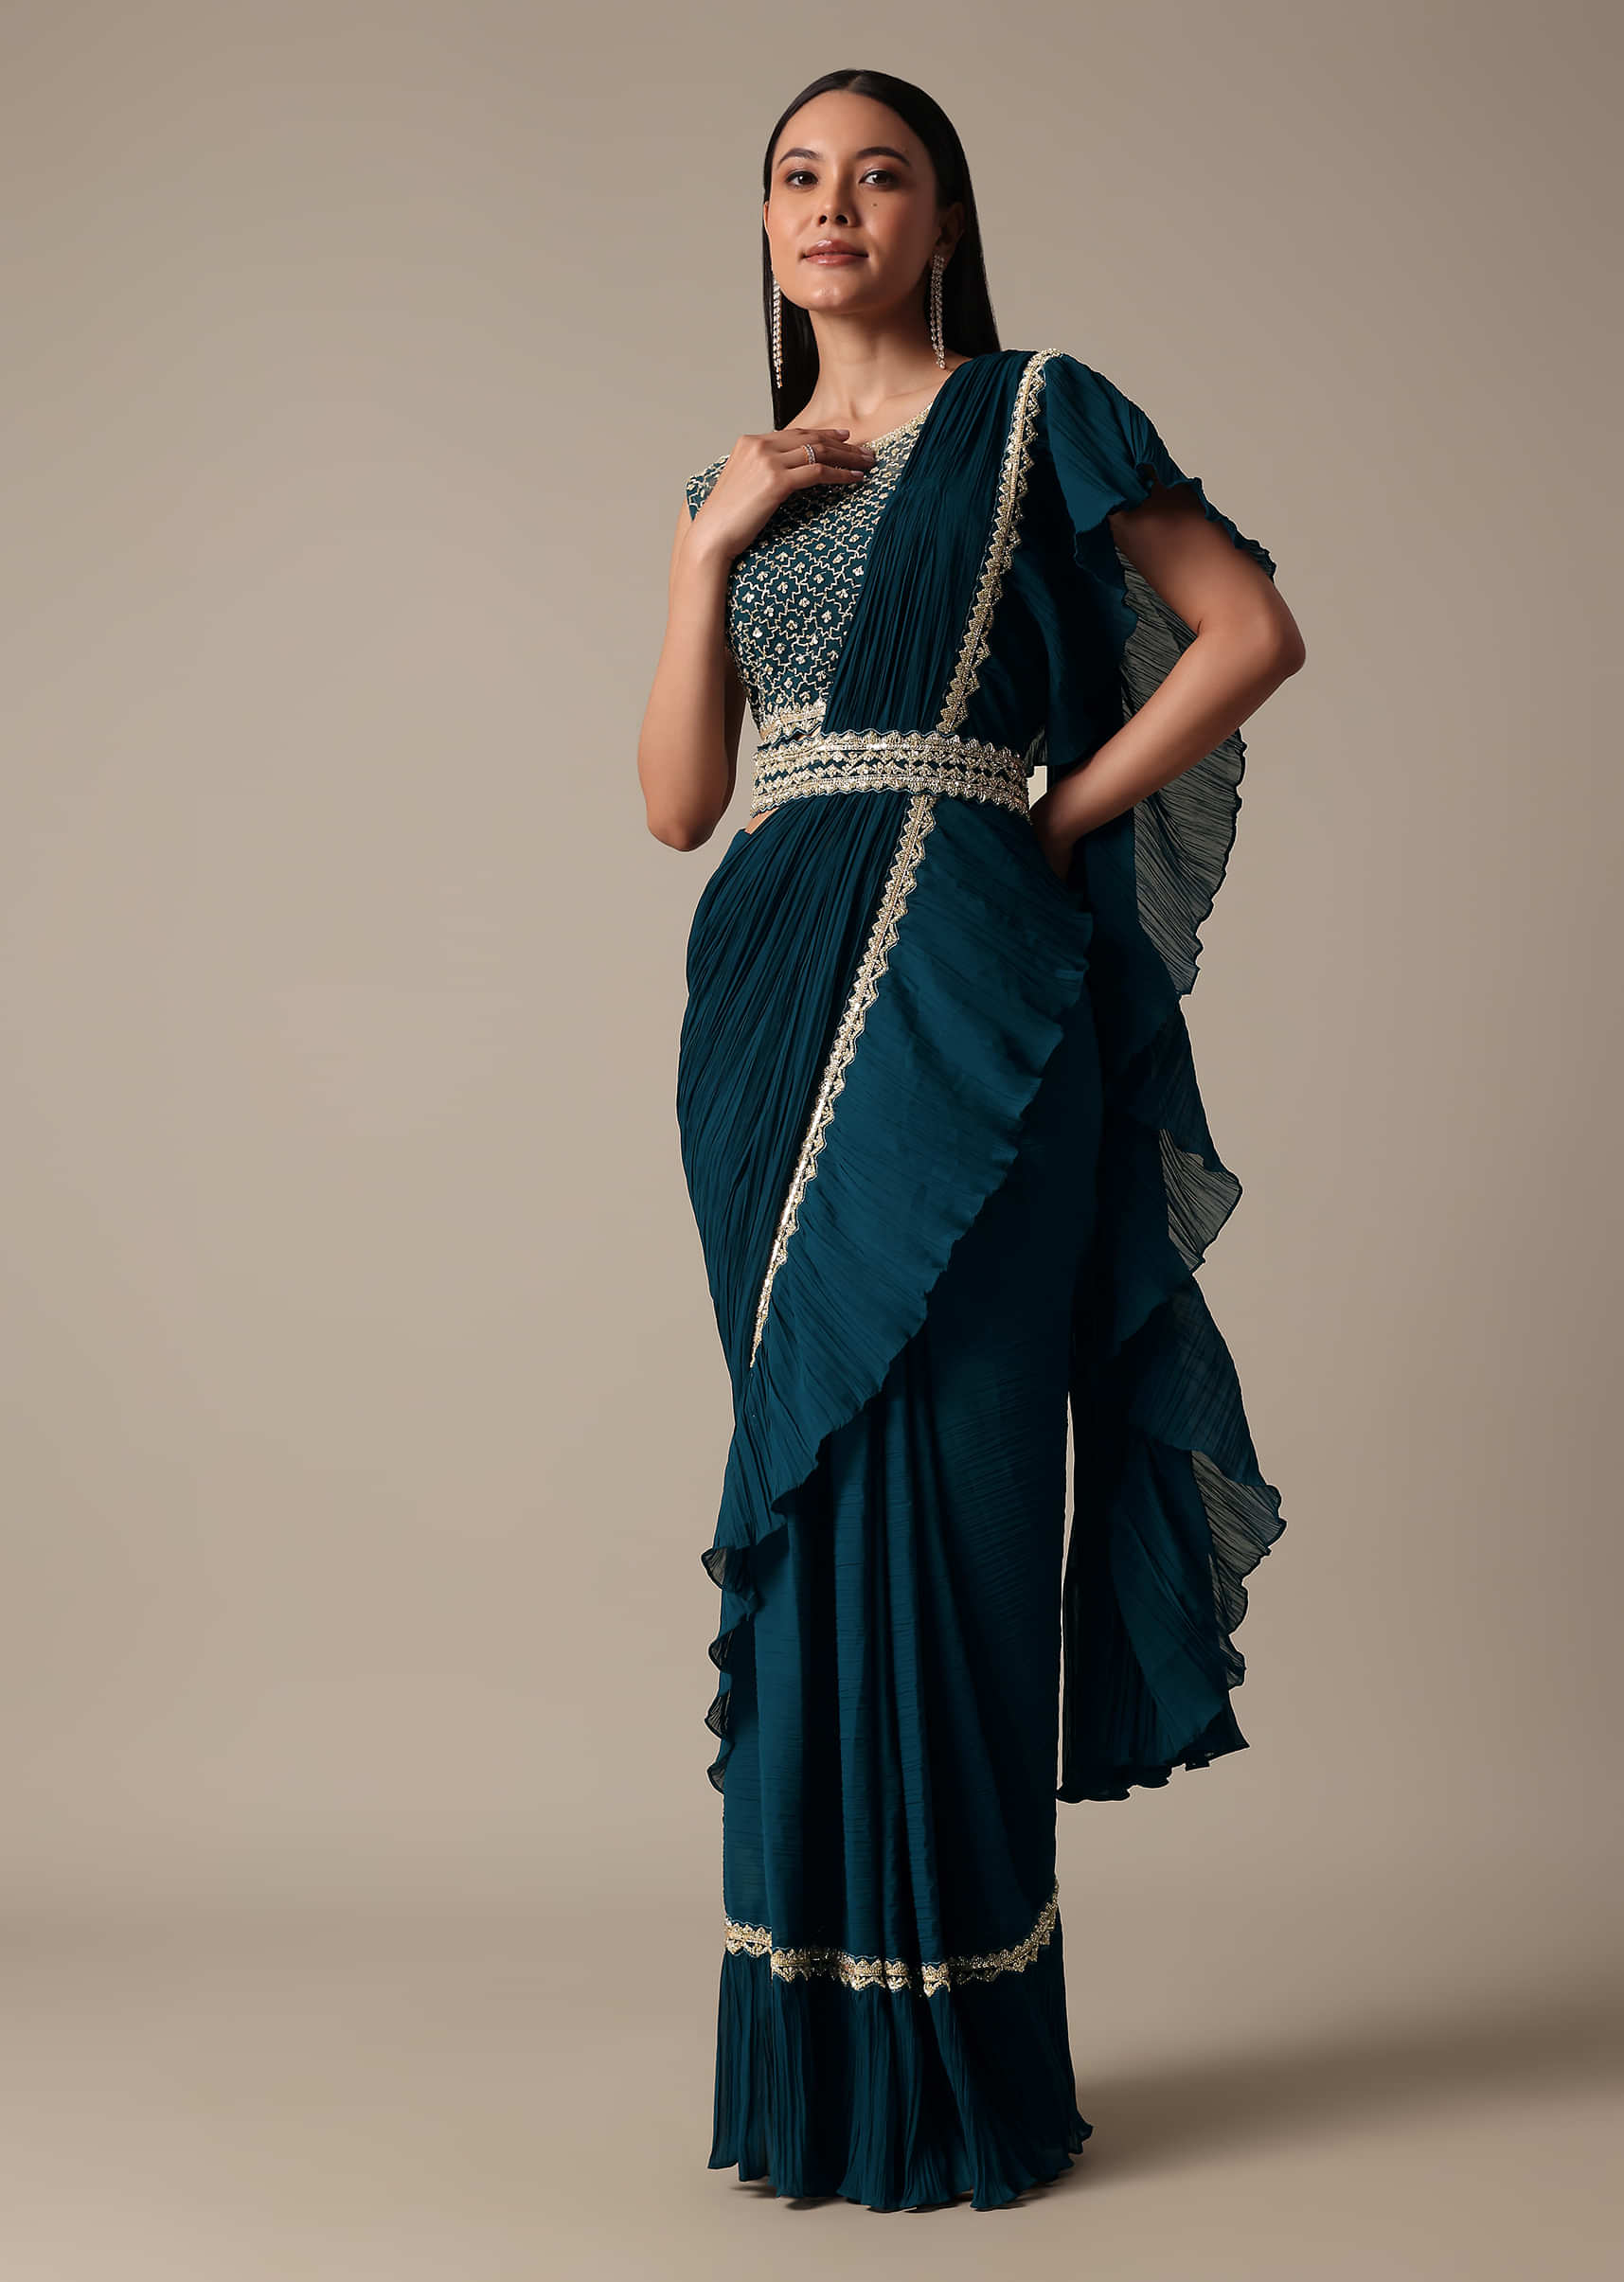 Fog Grey Ready-To-Wear Sequins Saree With Lycra Blouse And Embroidered Belt